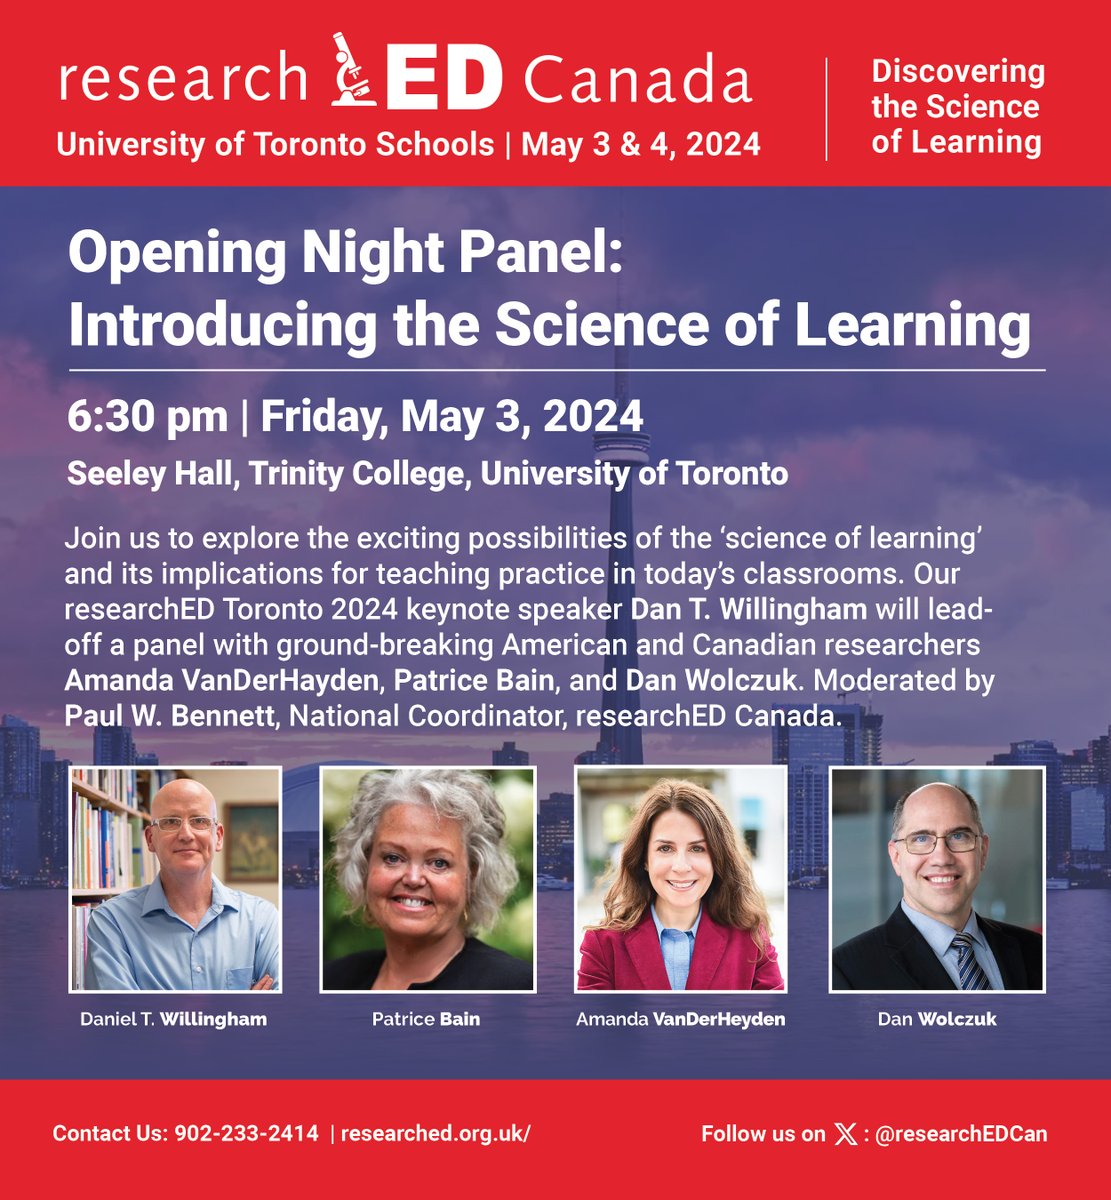 What's New? Our Conferences are Longer! researchED Canada starts on Friday Night May 3 with a Provocation and a Headliner Panel at Trinity College, University of Toronto. Our agent provocateur - @C_Hendrick and the Panel kicks-off with @DTWillingham Great chance to meet & greet!